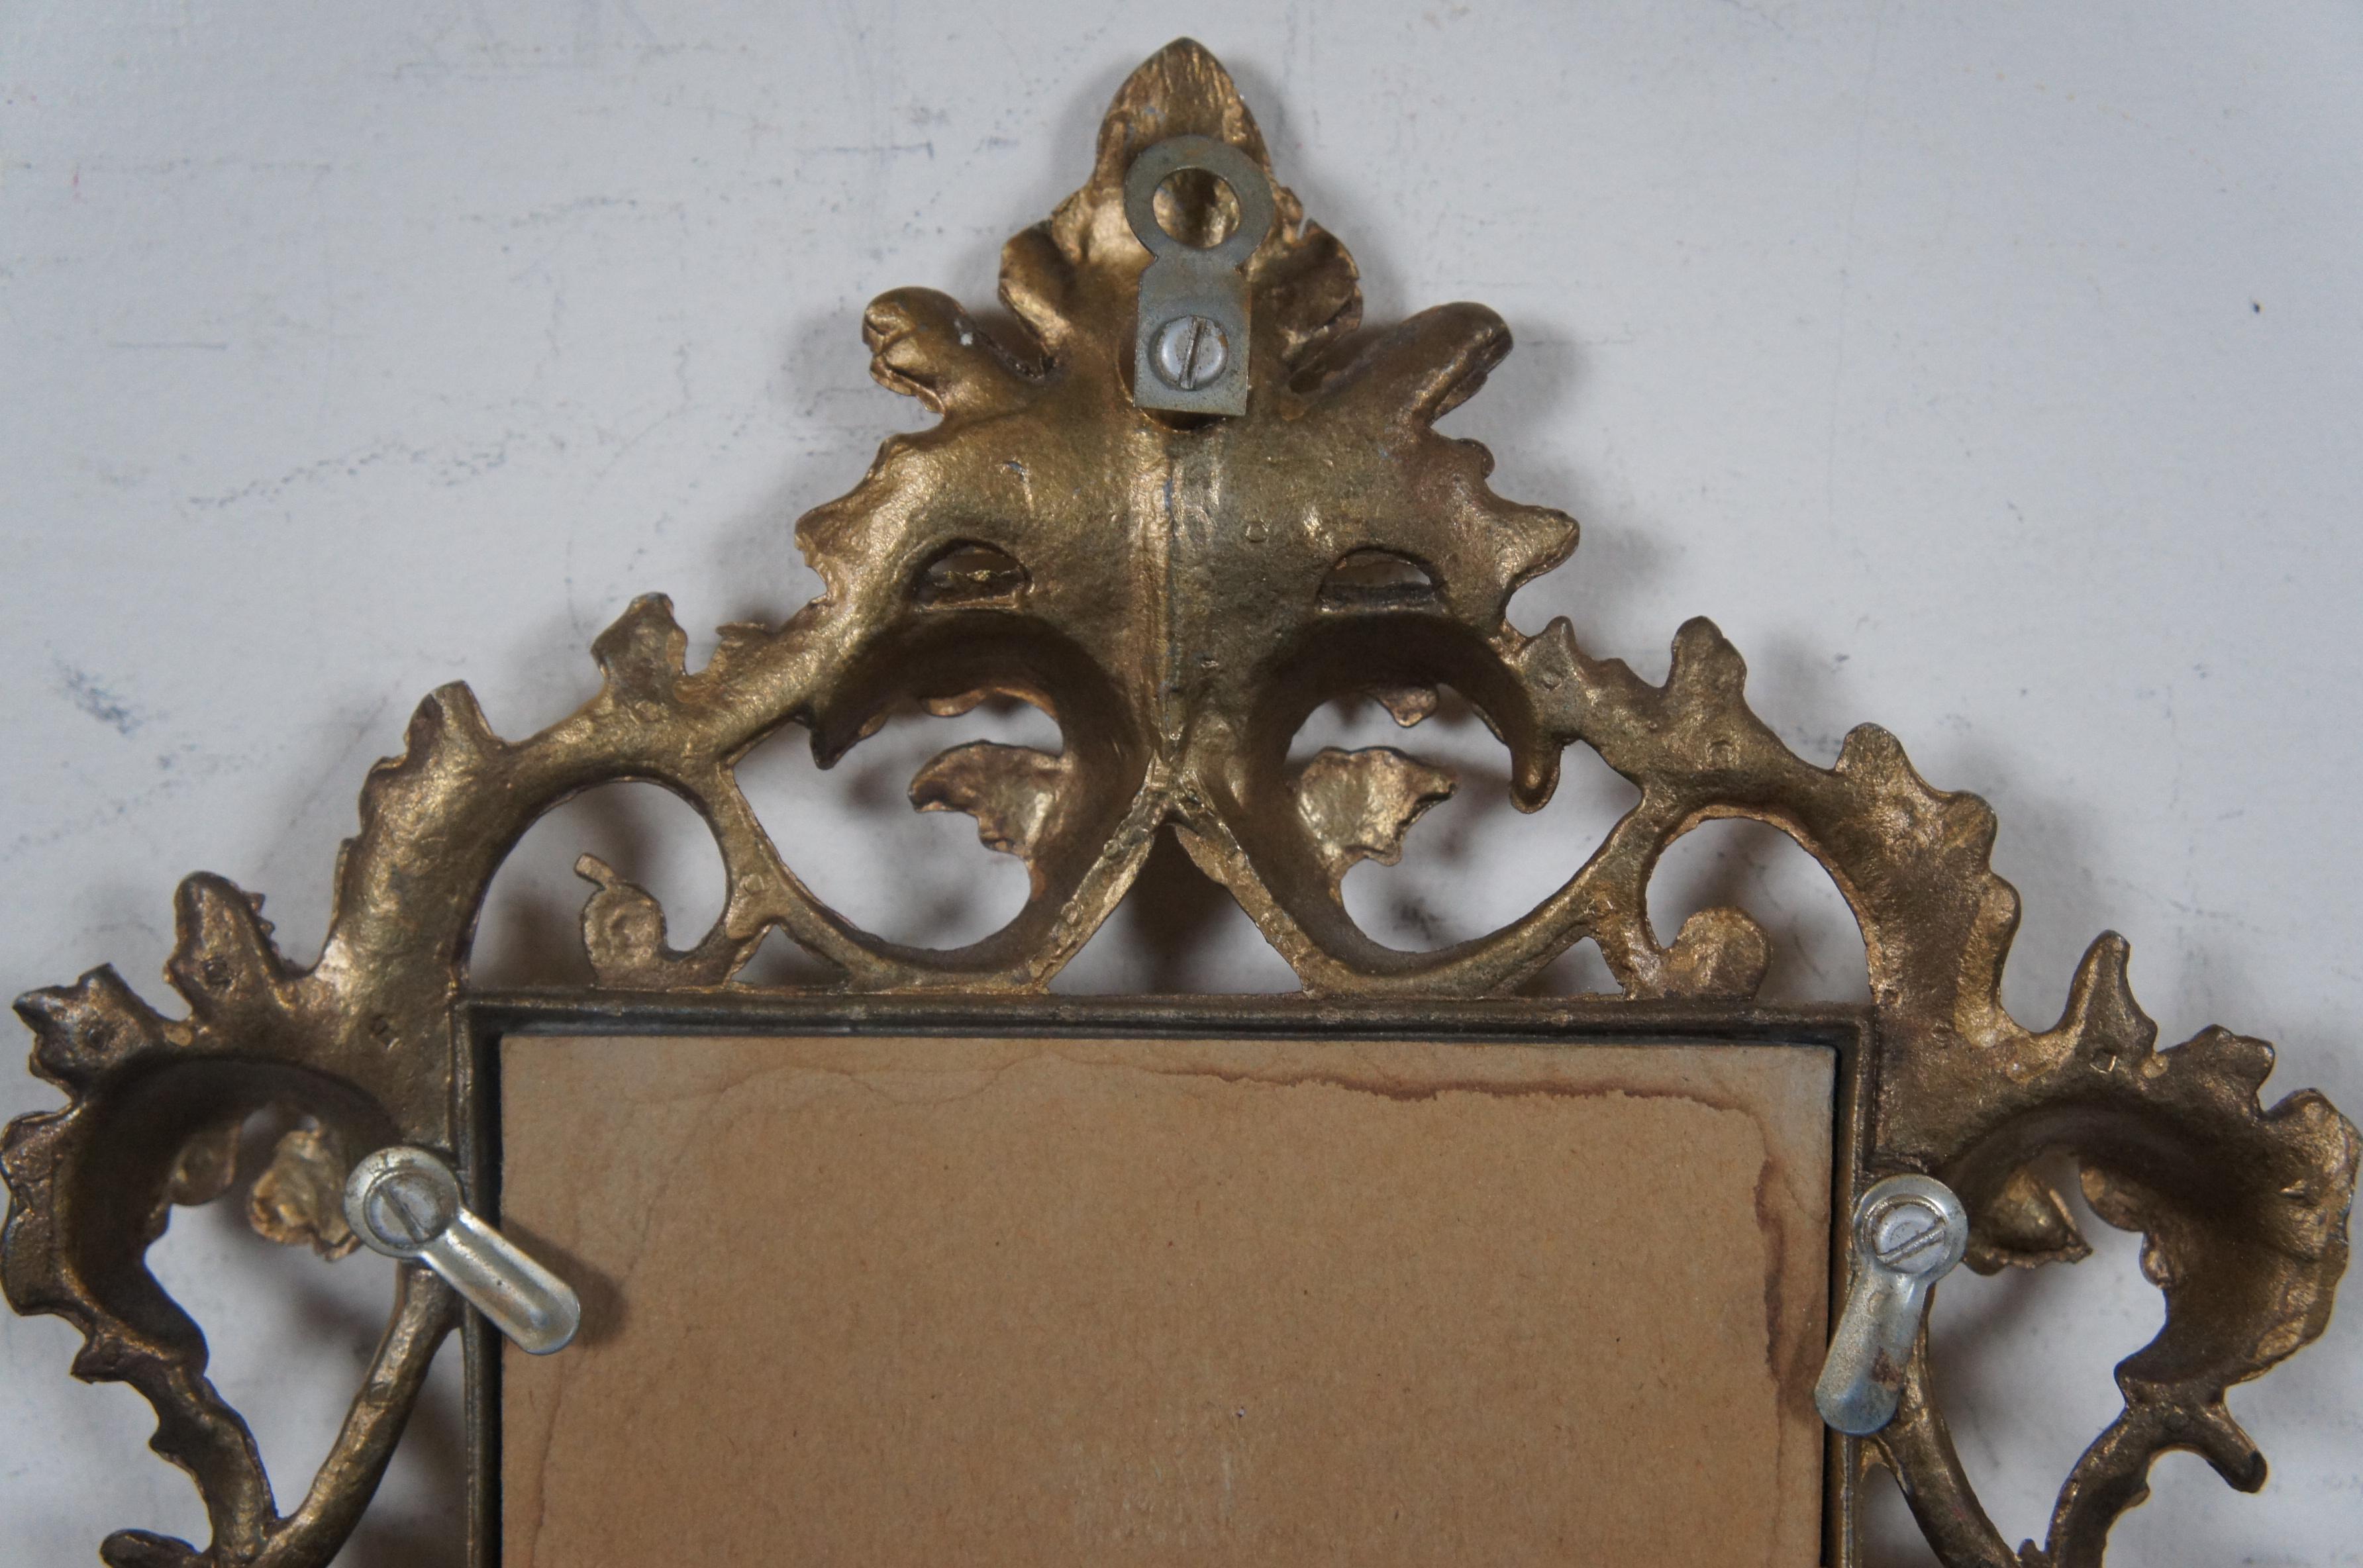 19th Century Antique Baroque Cast Iron Gilt Tabletop Picture Mirror Frame French European